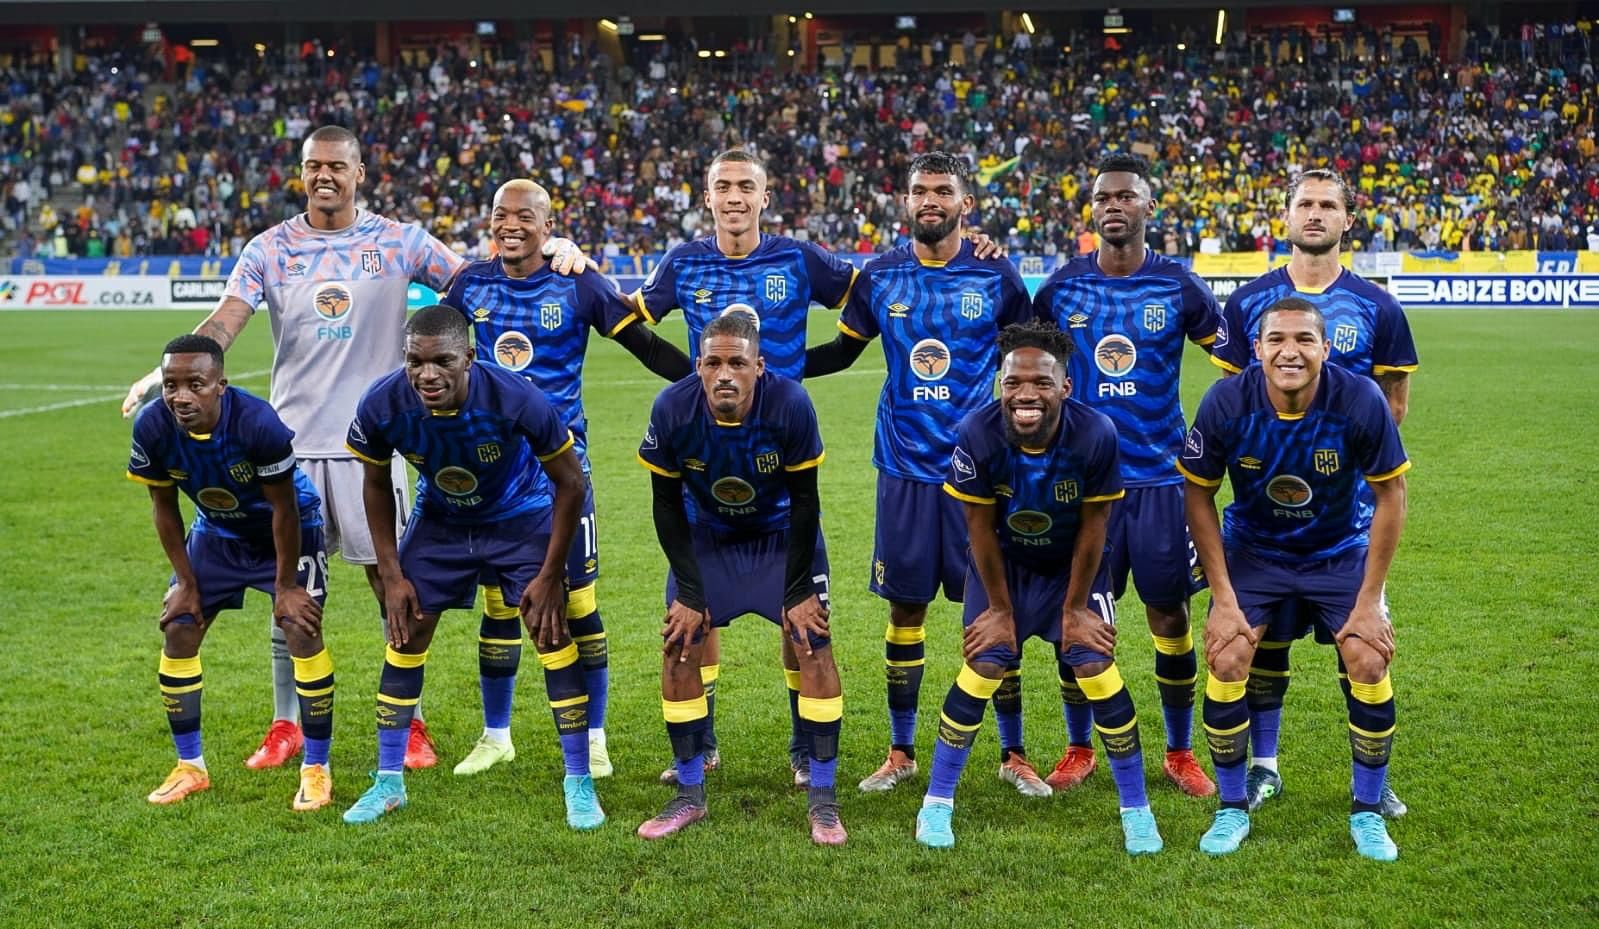 Moroka Swallows vs Cape Town City Predictions, Betting Tips & Odds | 09 August, 2022